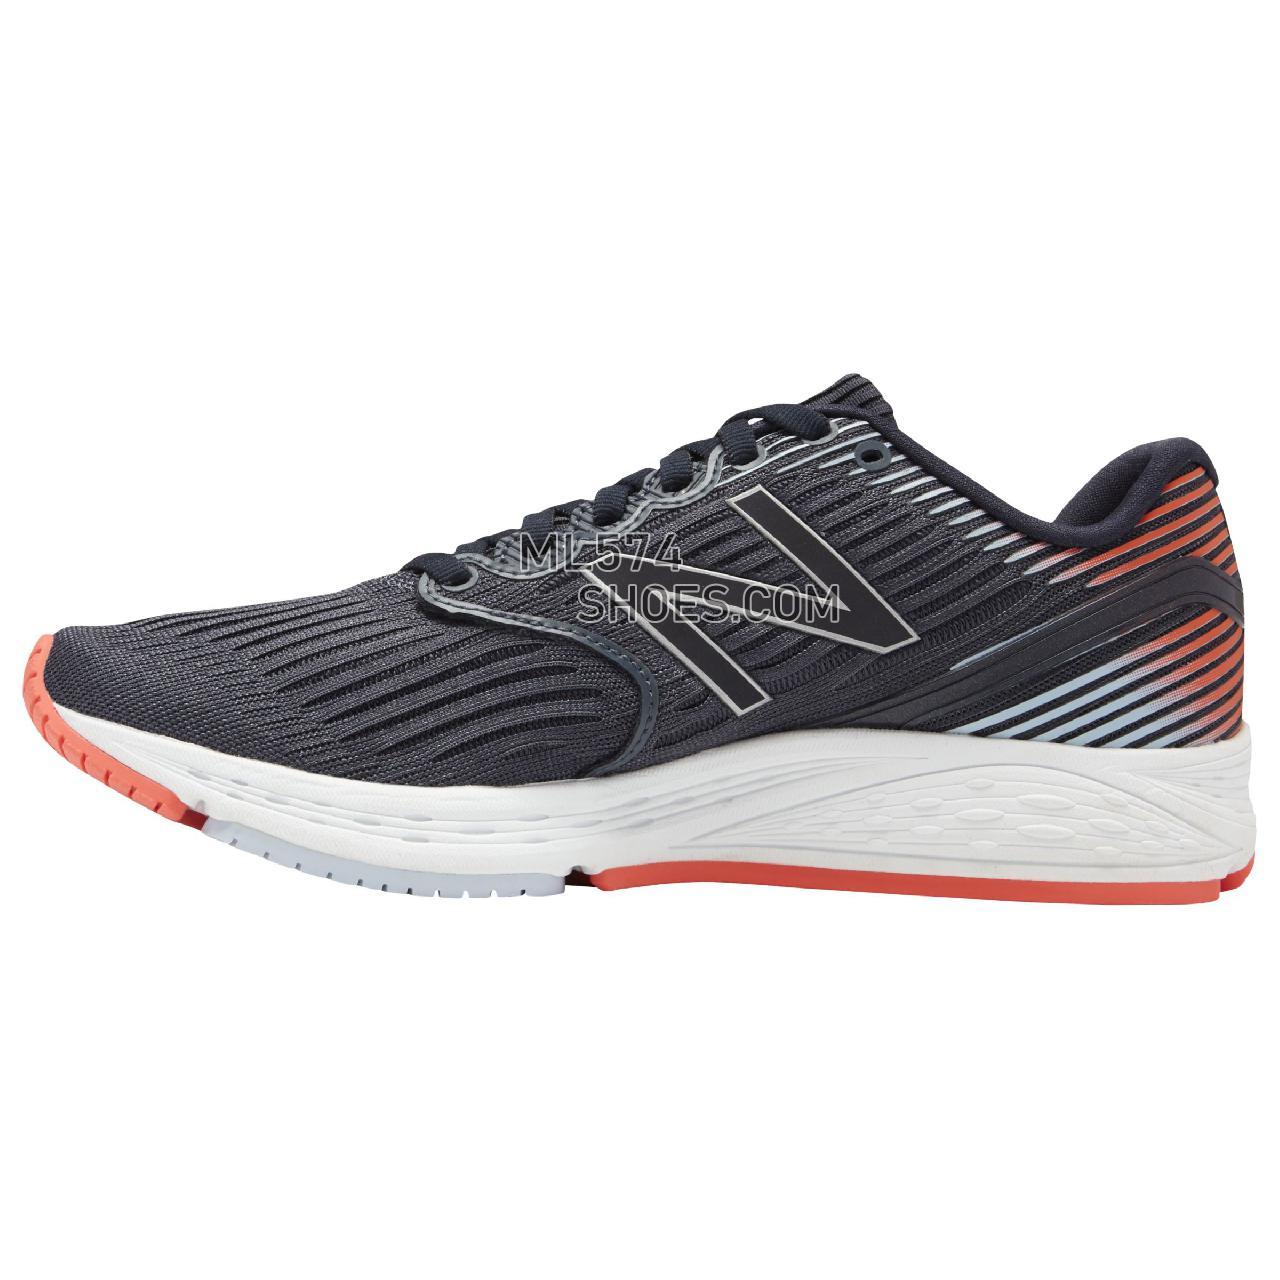 New Balance 890v6 - Women's 890 - Running Outerspace with Dragonfly - W890TD6